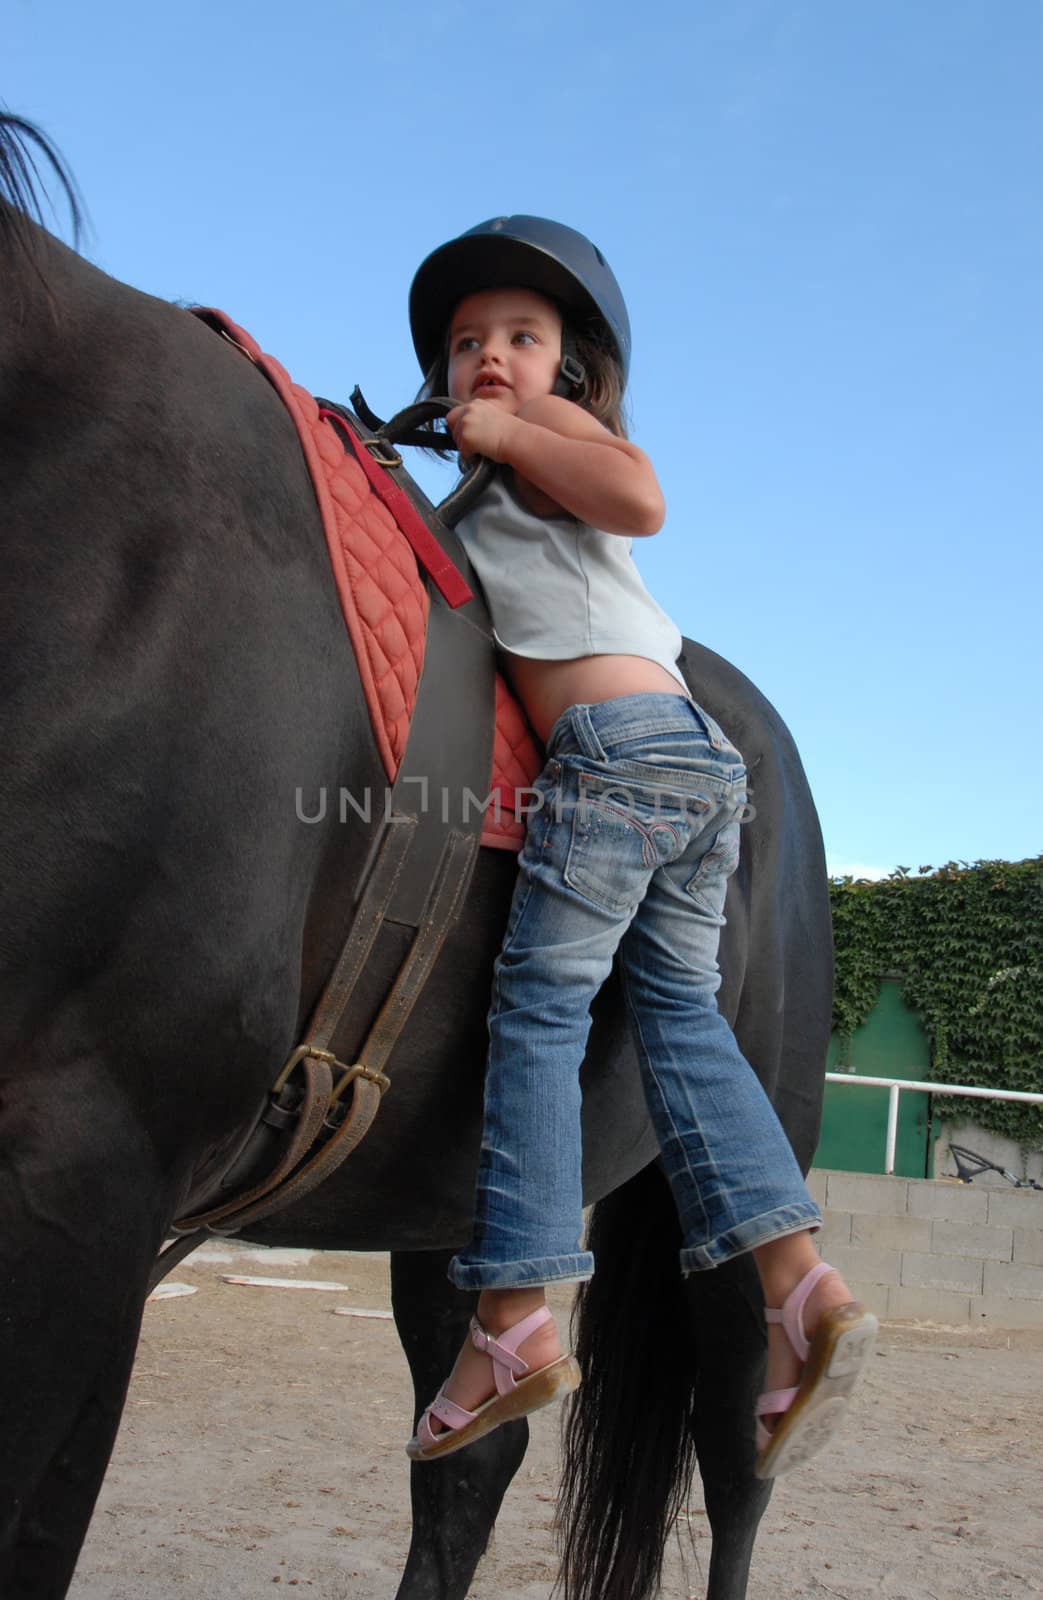 very young little girl on her black stallion

